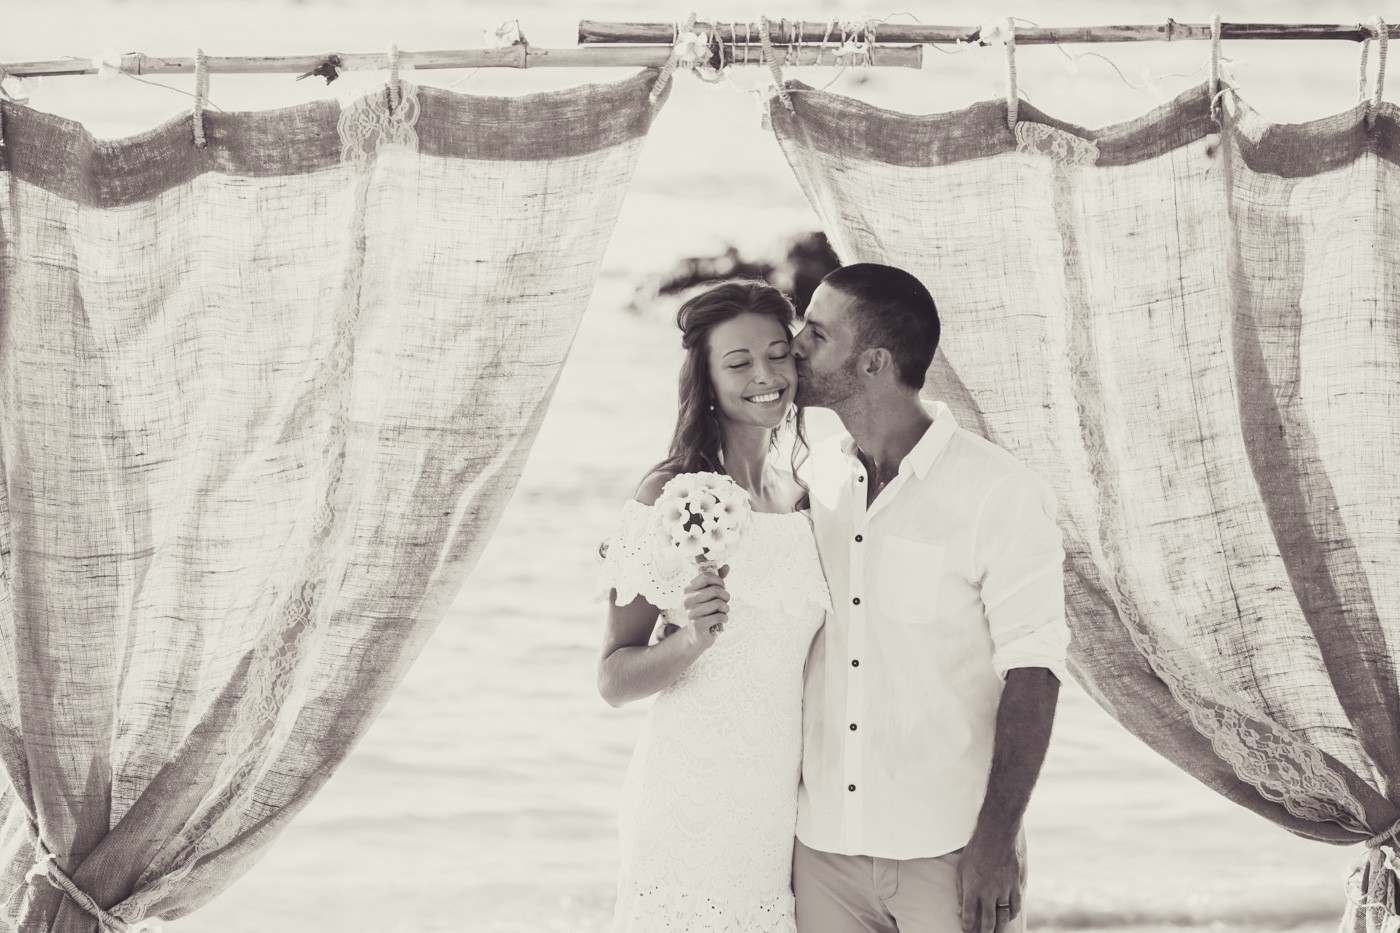 Behind the Scenes of Our Costa Rican Beach Wedding